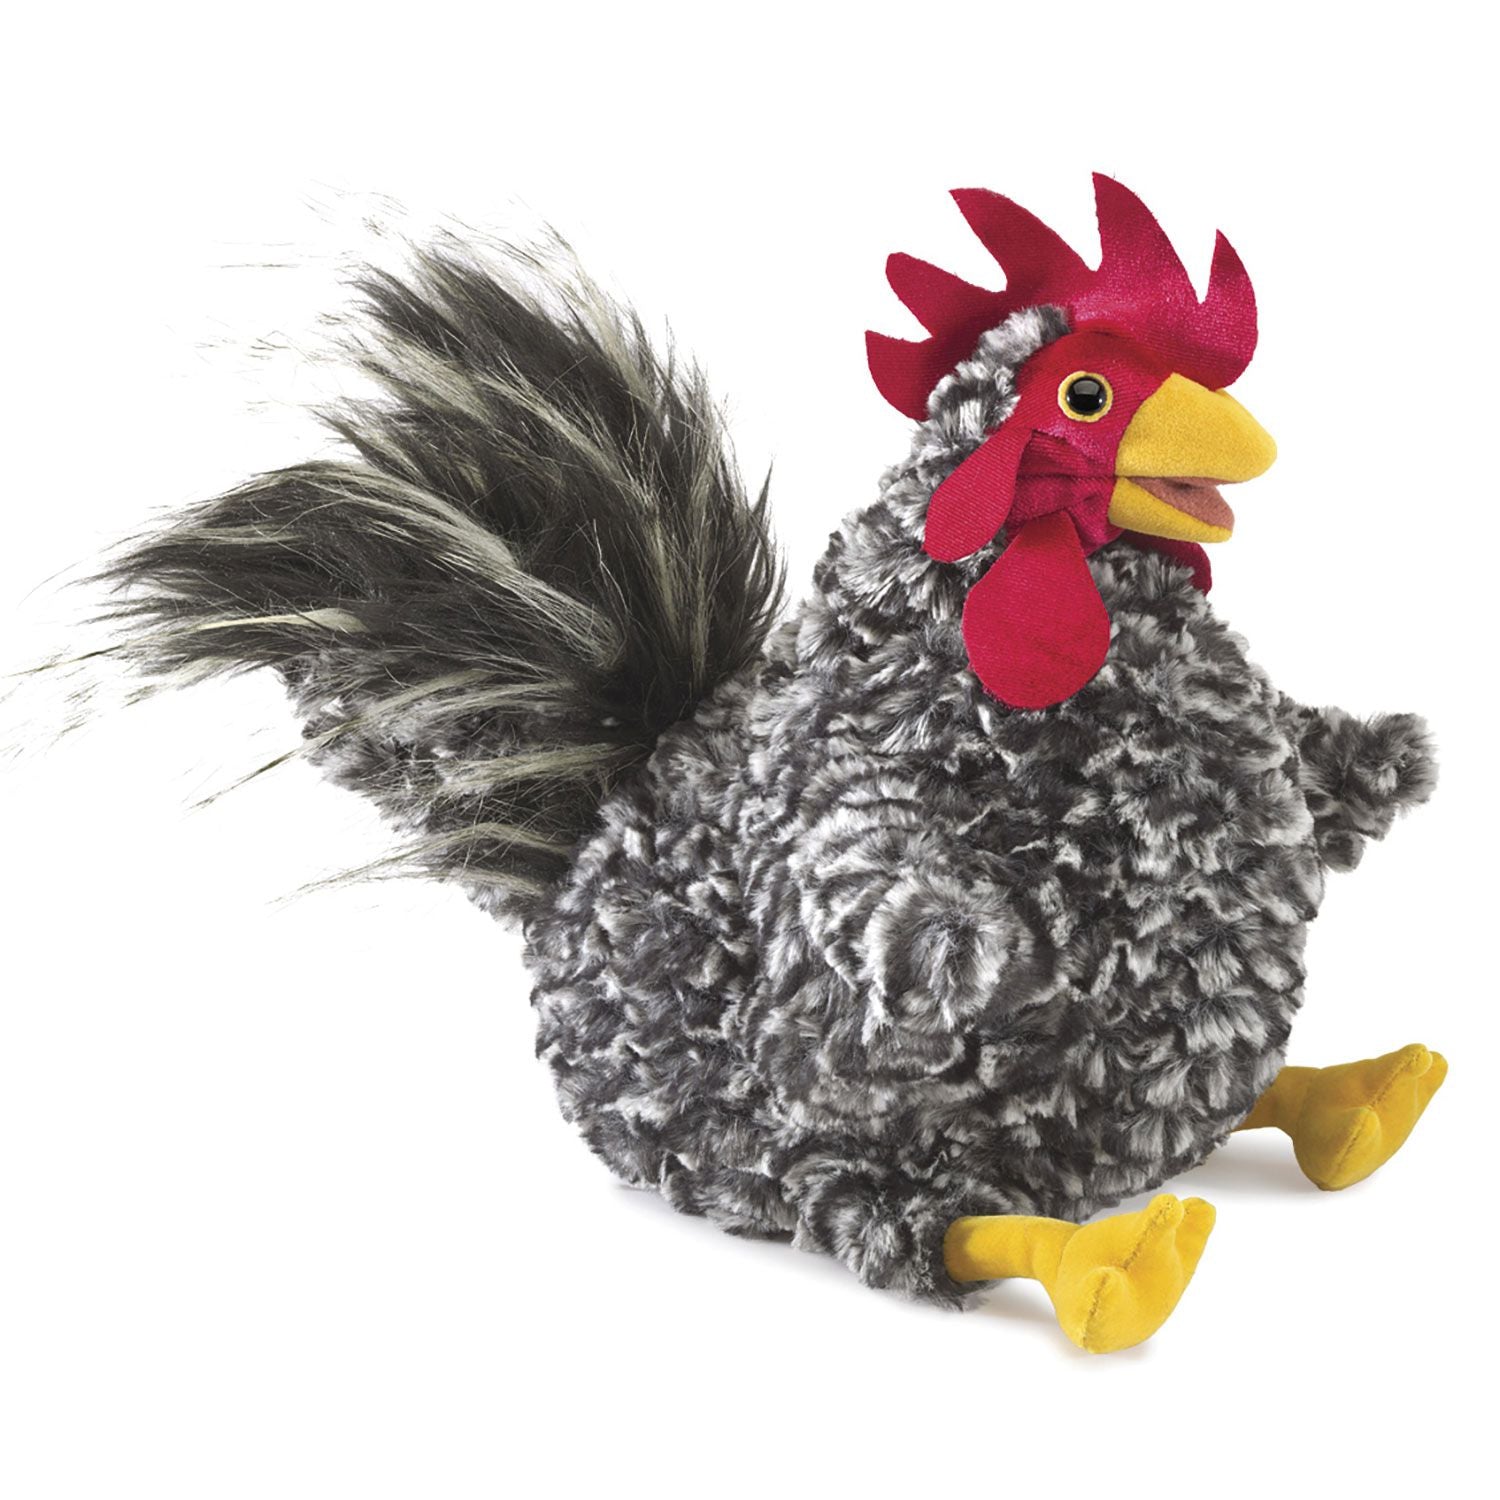 Folkmanis Puppets | Barred Rock Rooster / Hahn